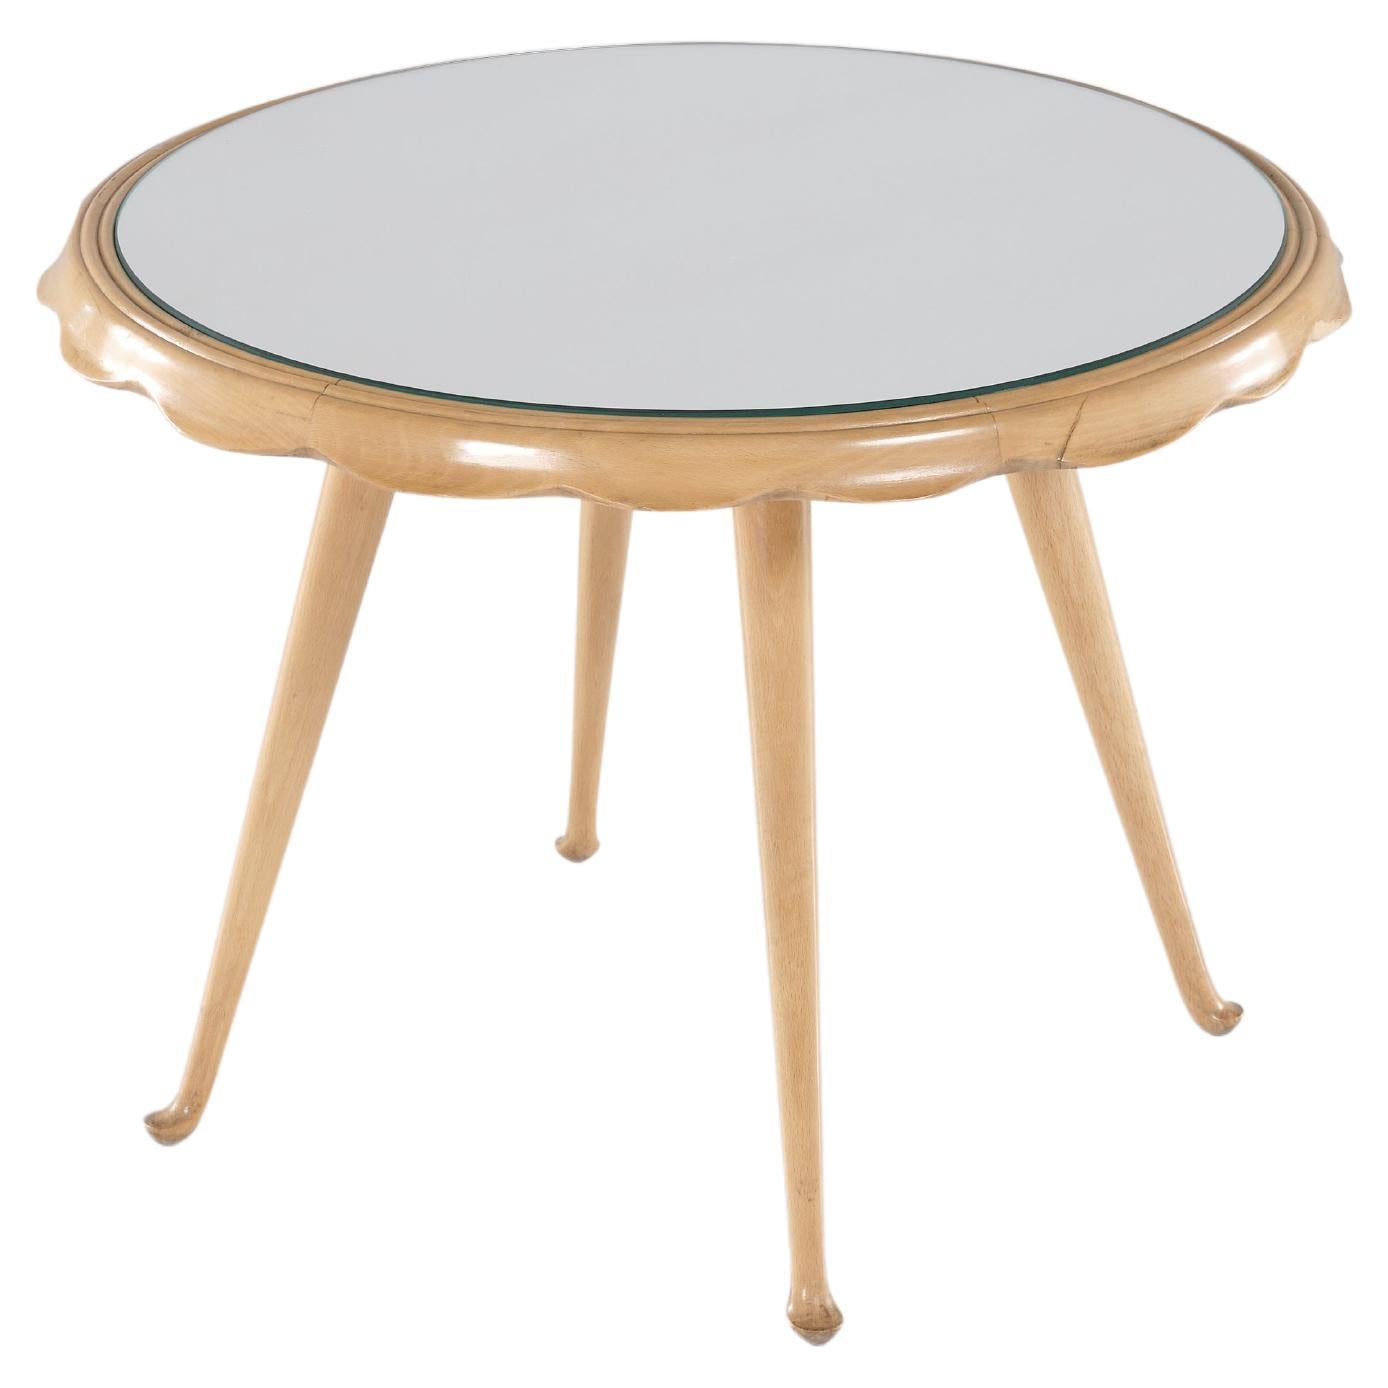 One Wood and Mirrored Glass Low Table, Italian Design, 1950 circa For Sale